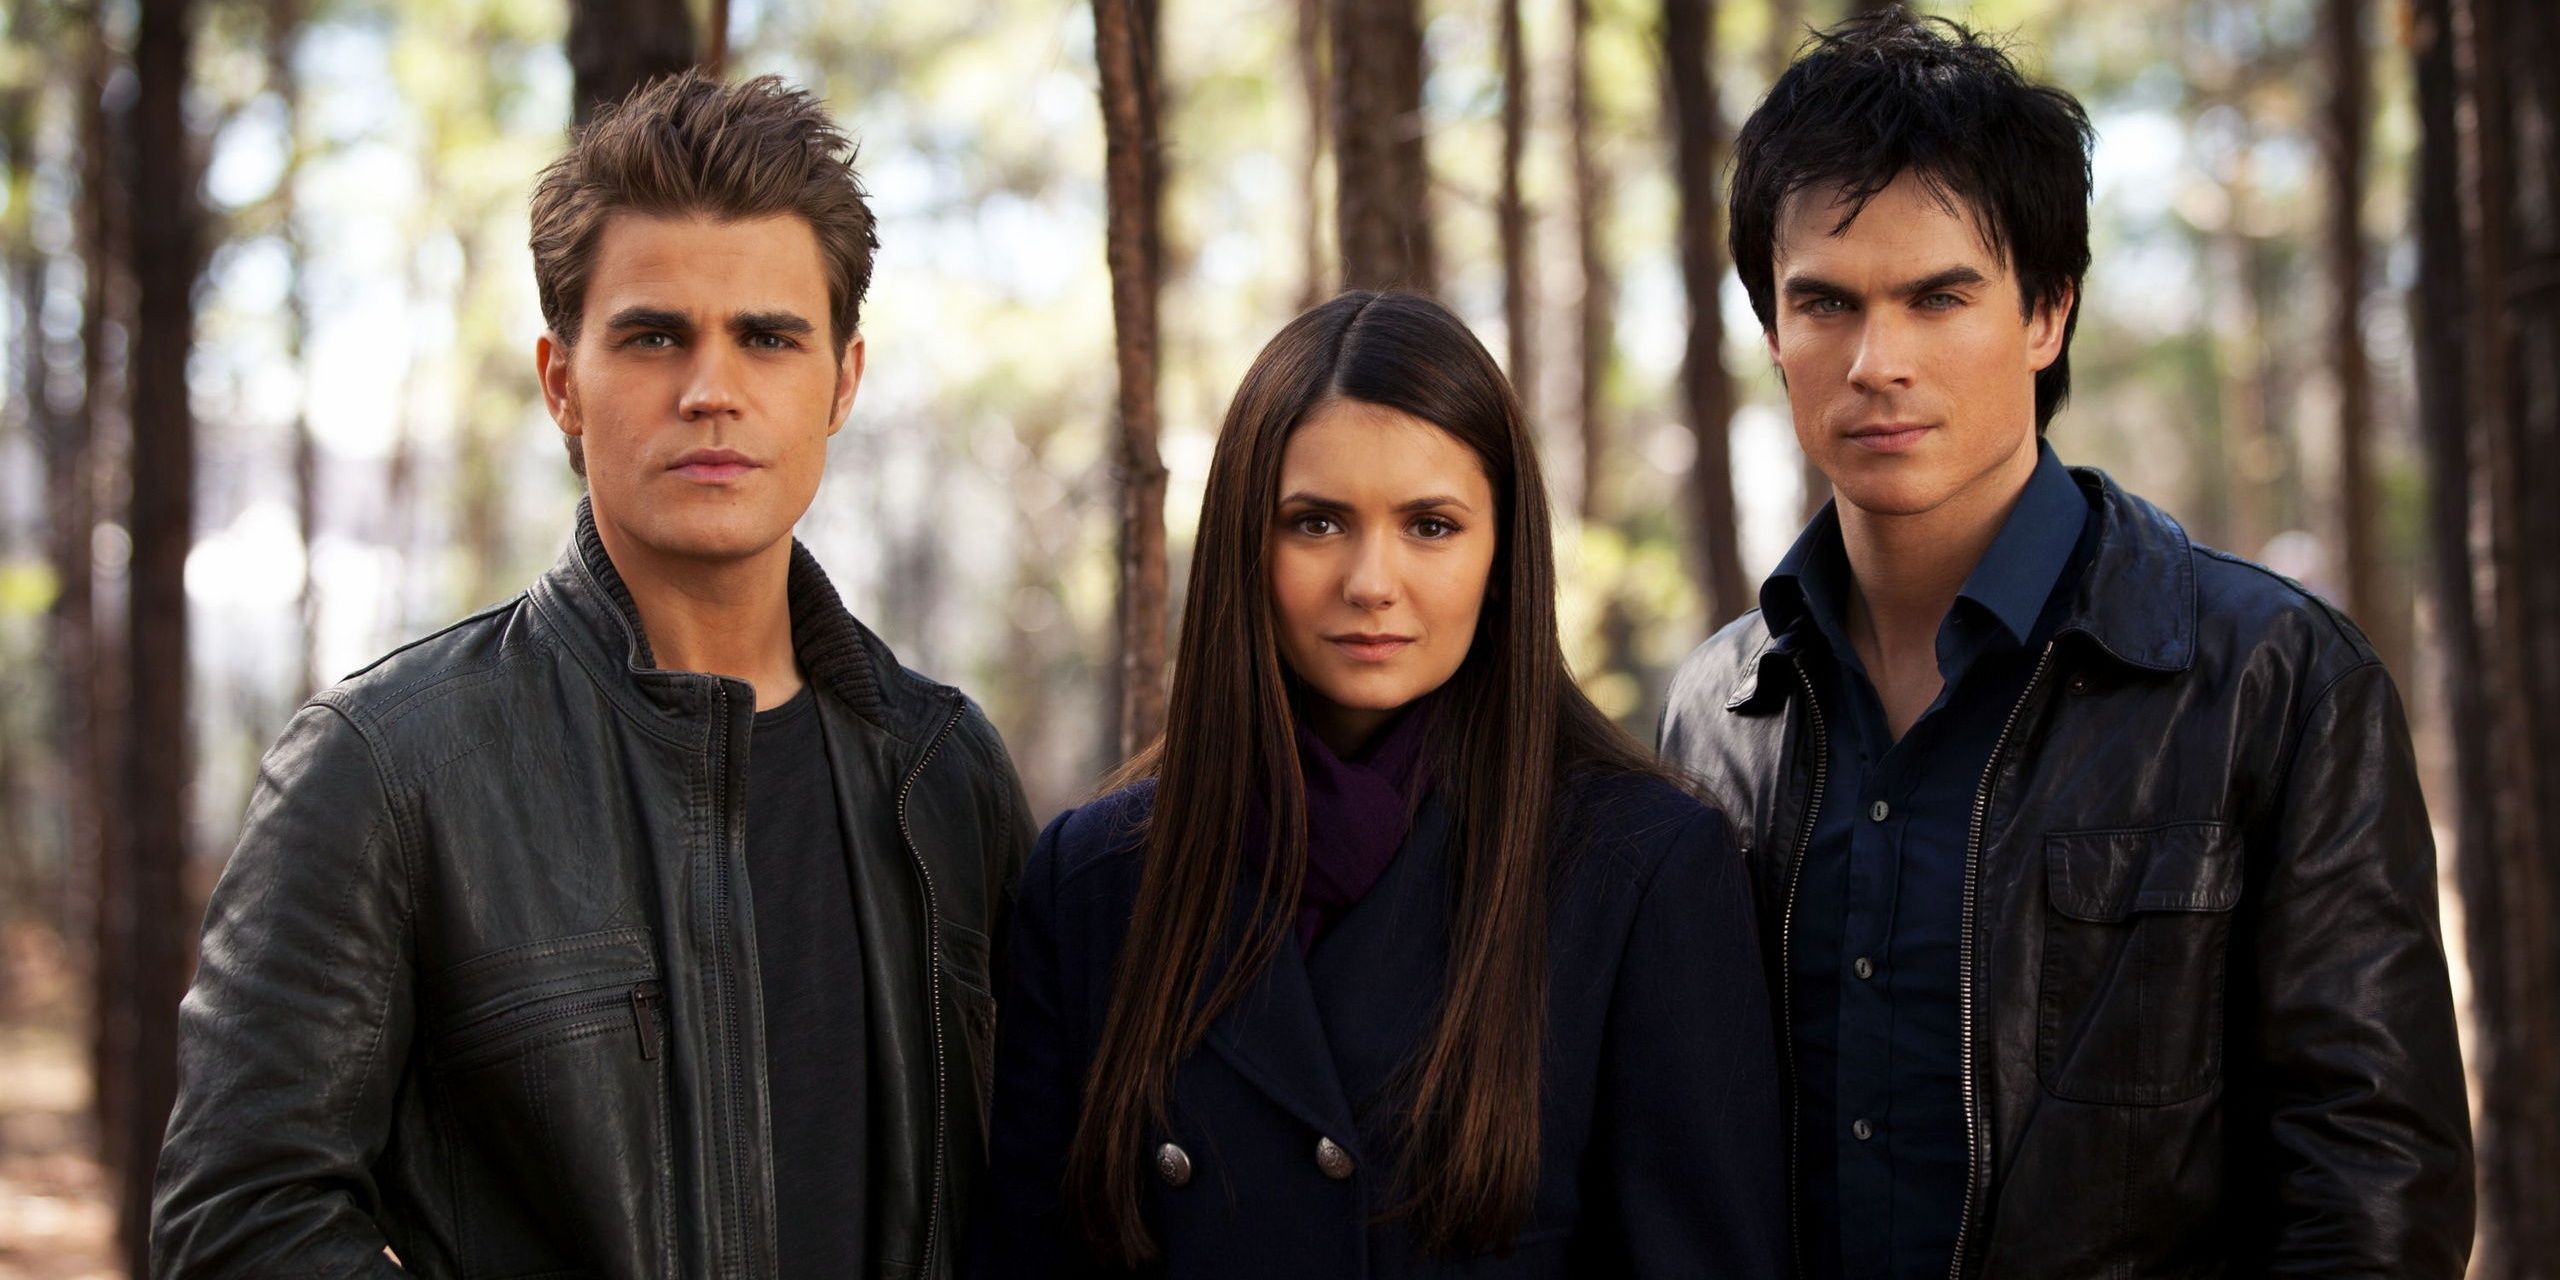 Damon Stefan and Elena in The Vampire Diaries Cropped